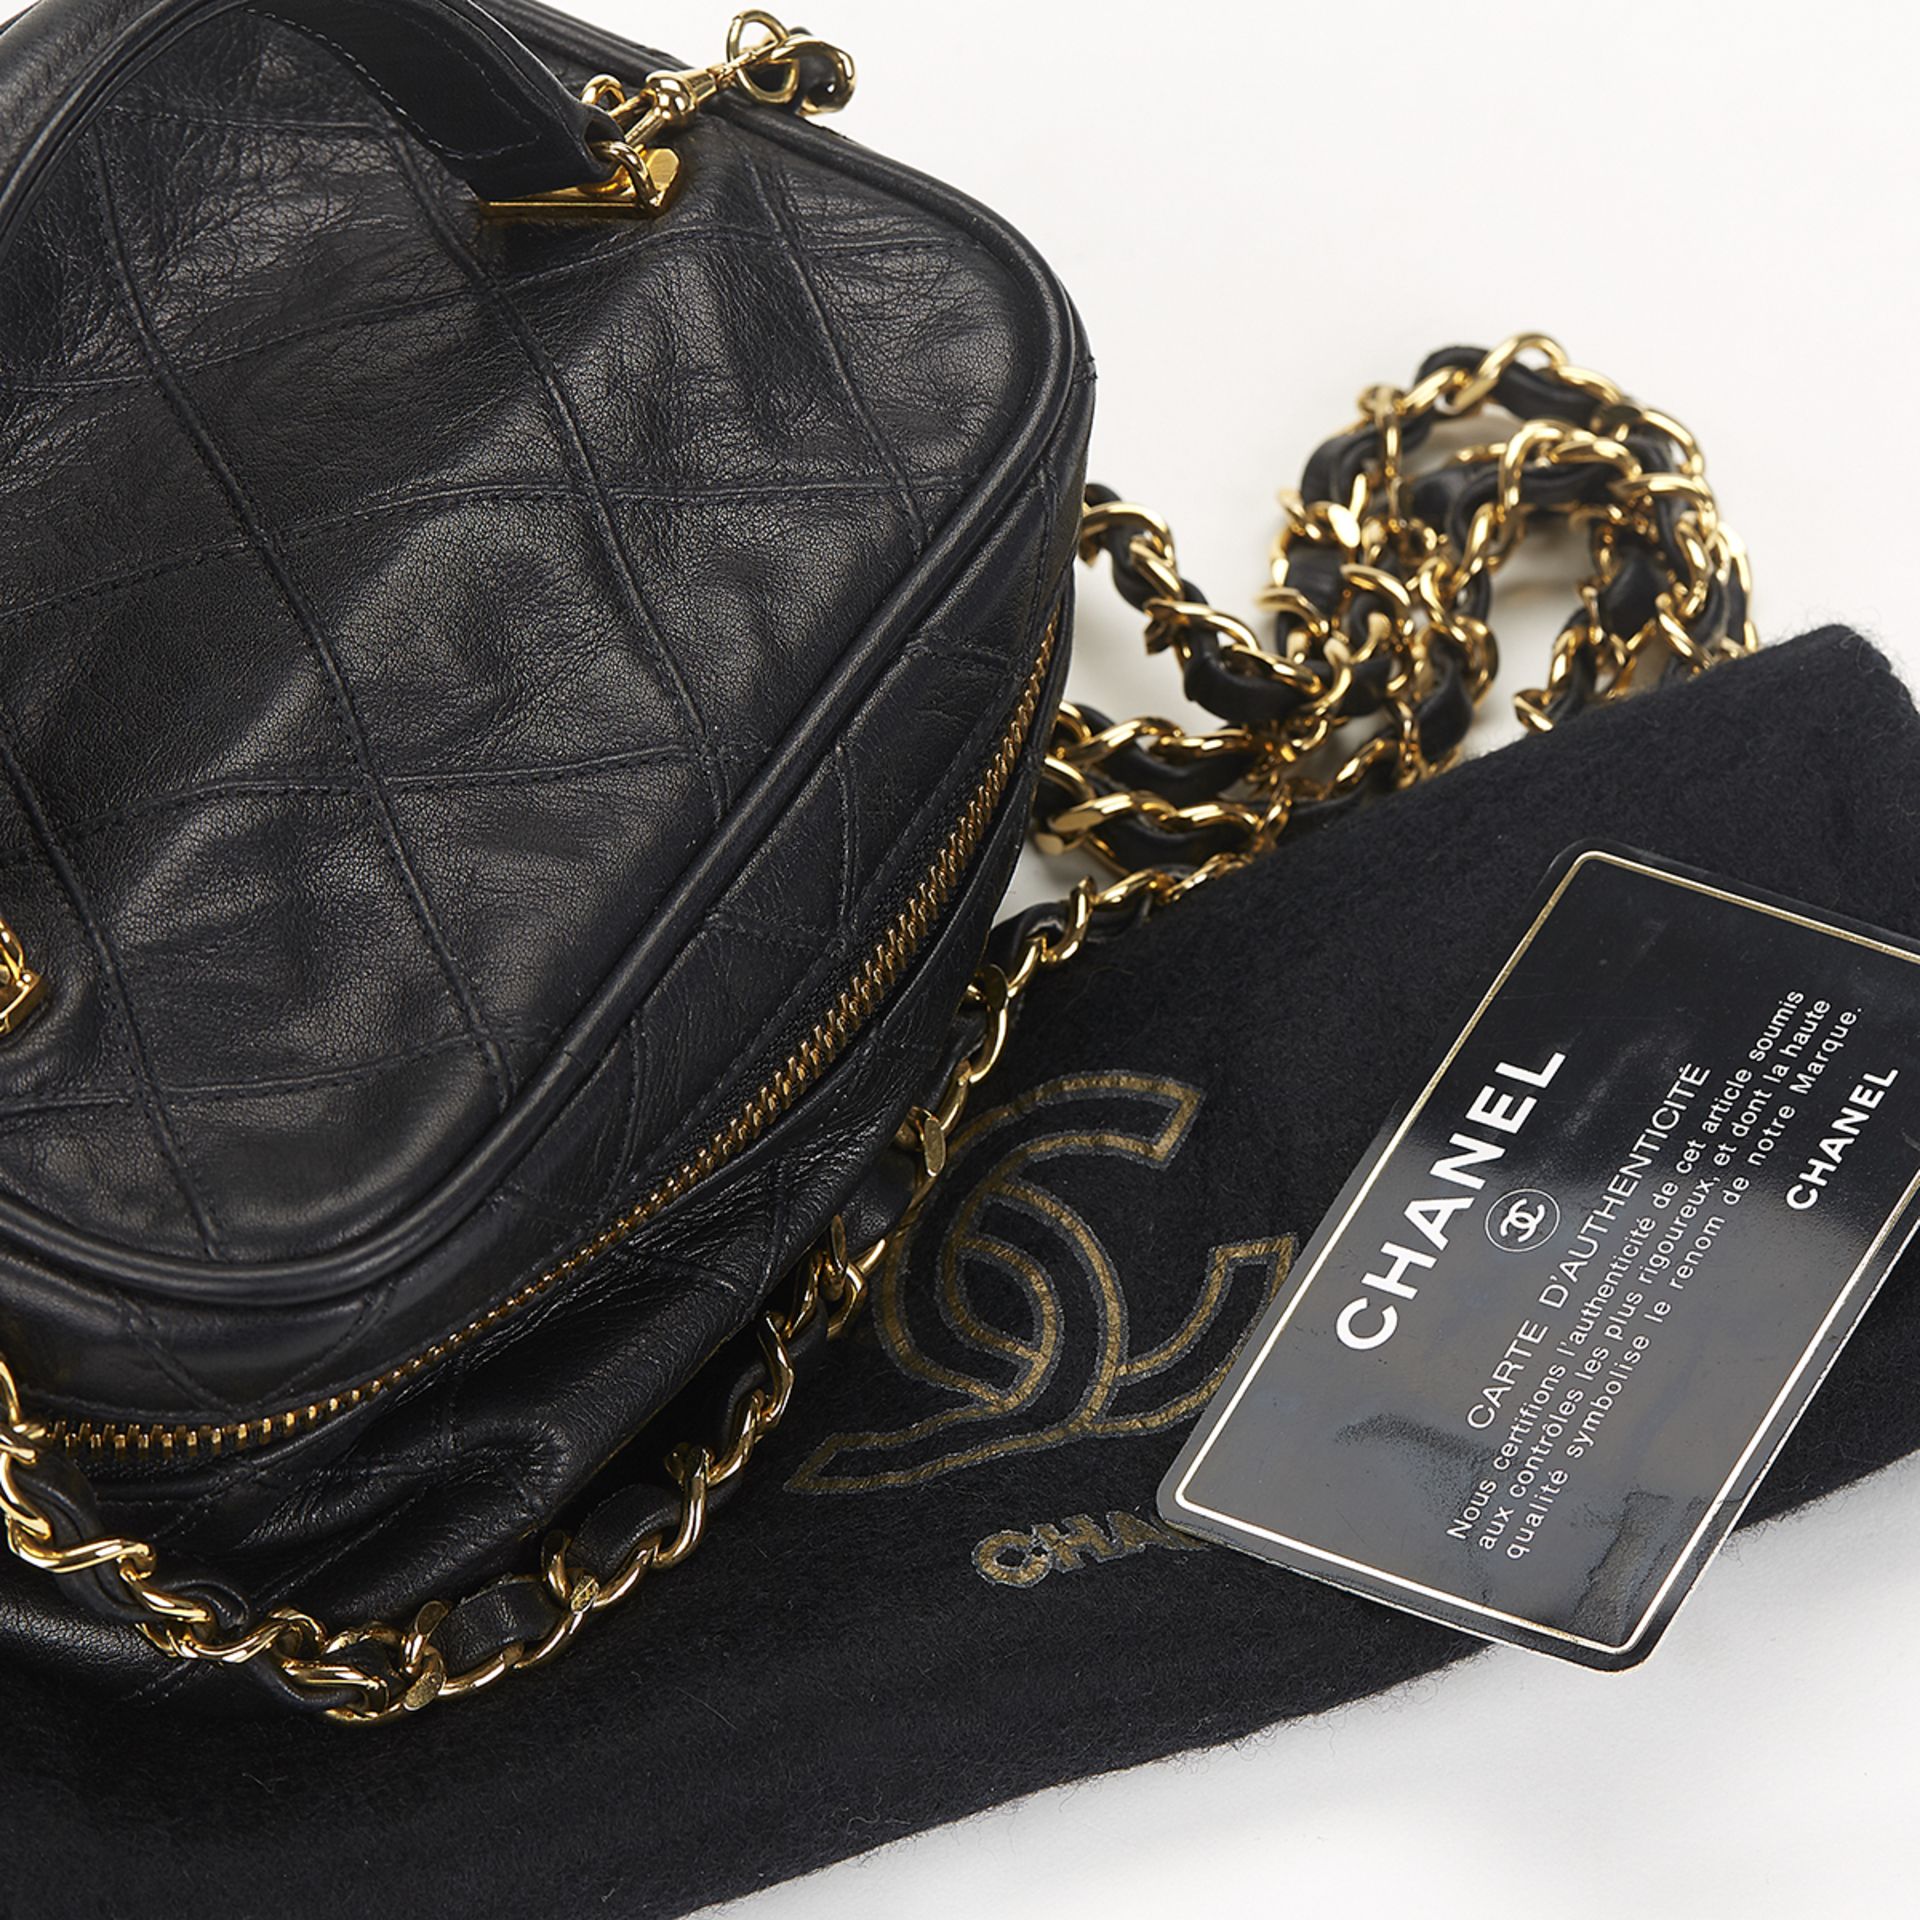 CHANEL Mini Timeless Train Case - Image 9 of 9